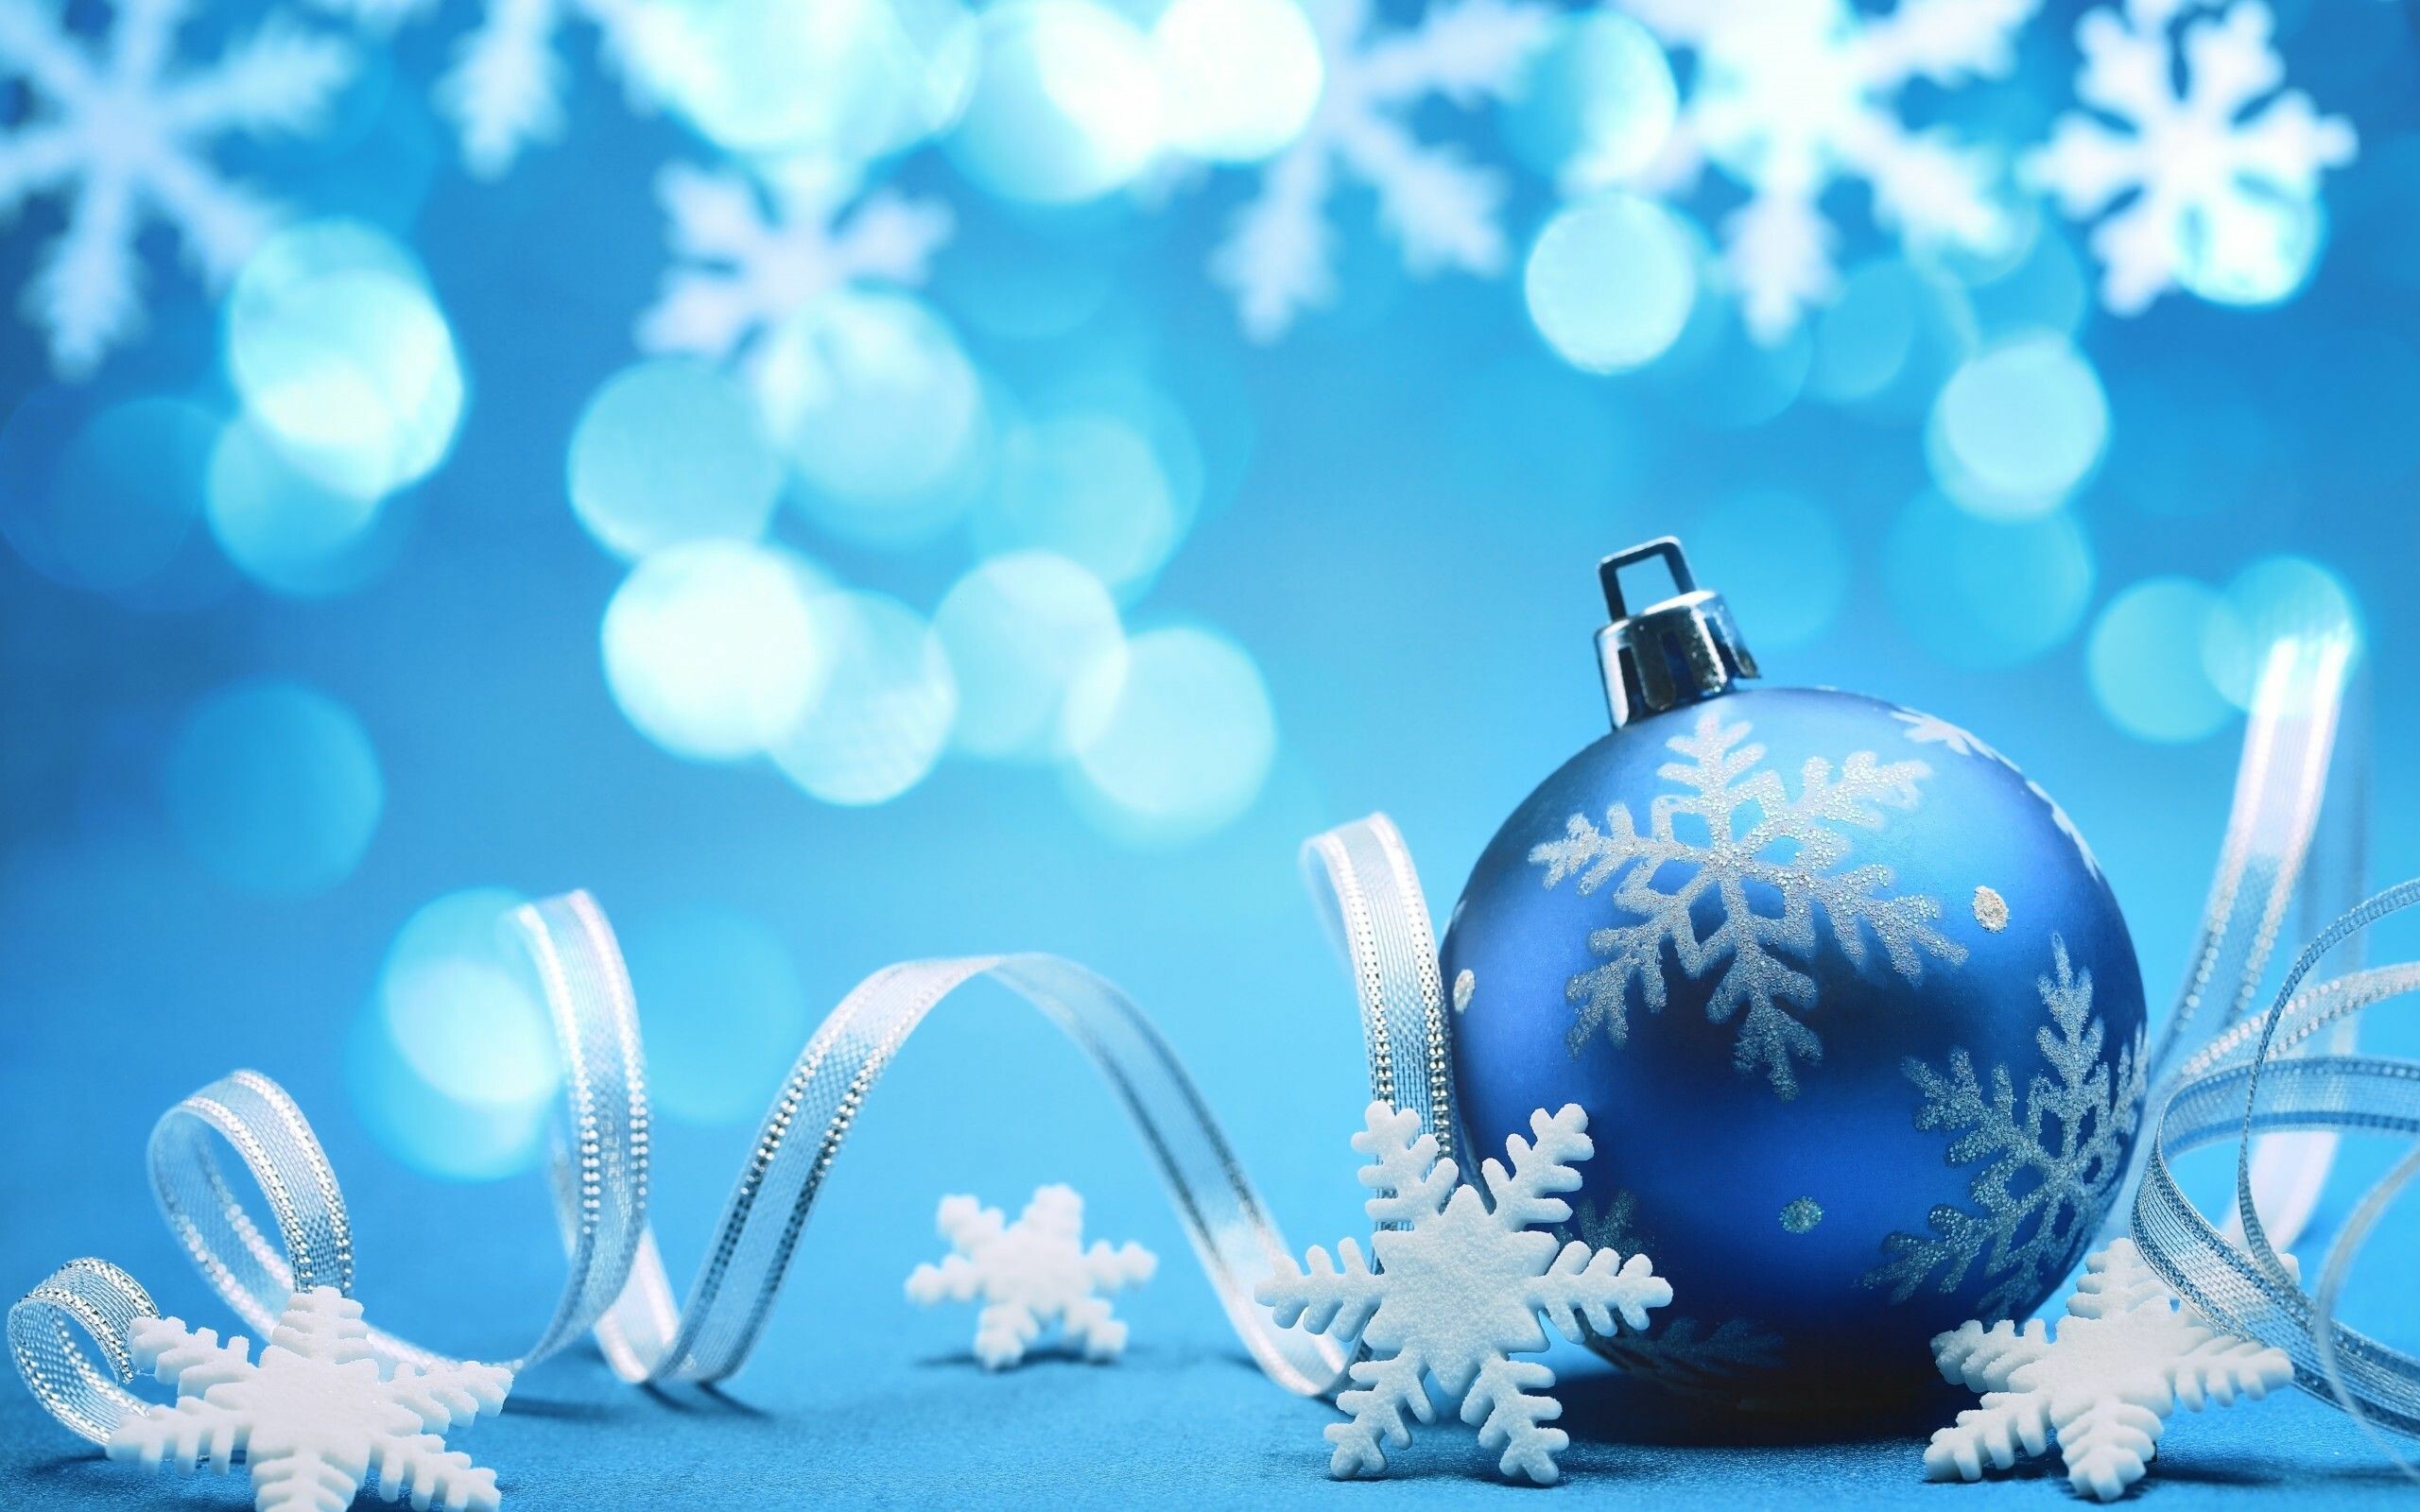 Decorations: Christmas, Any adornment or means of adornment. 2560x1600 HD Wallpaper.